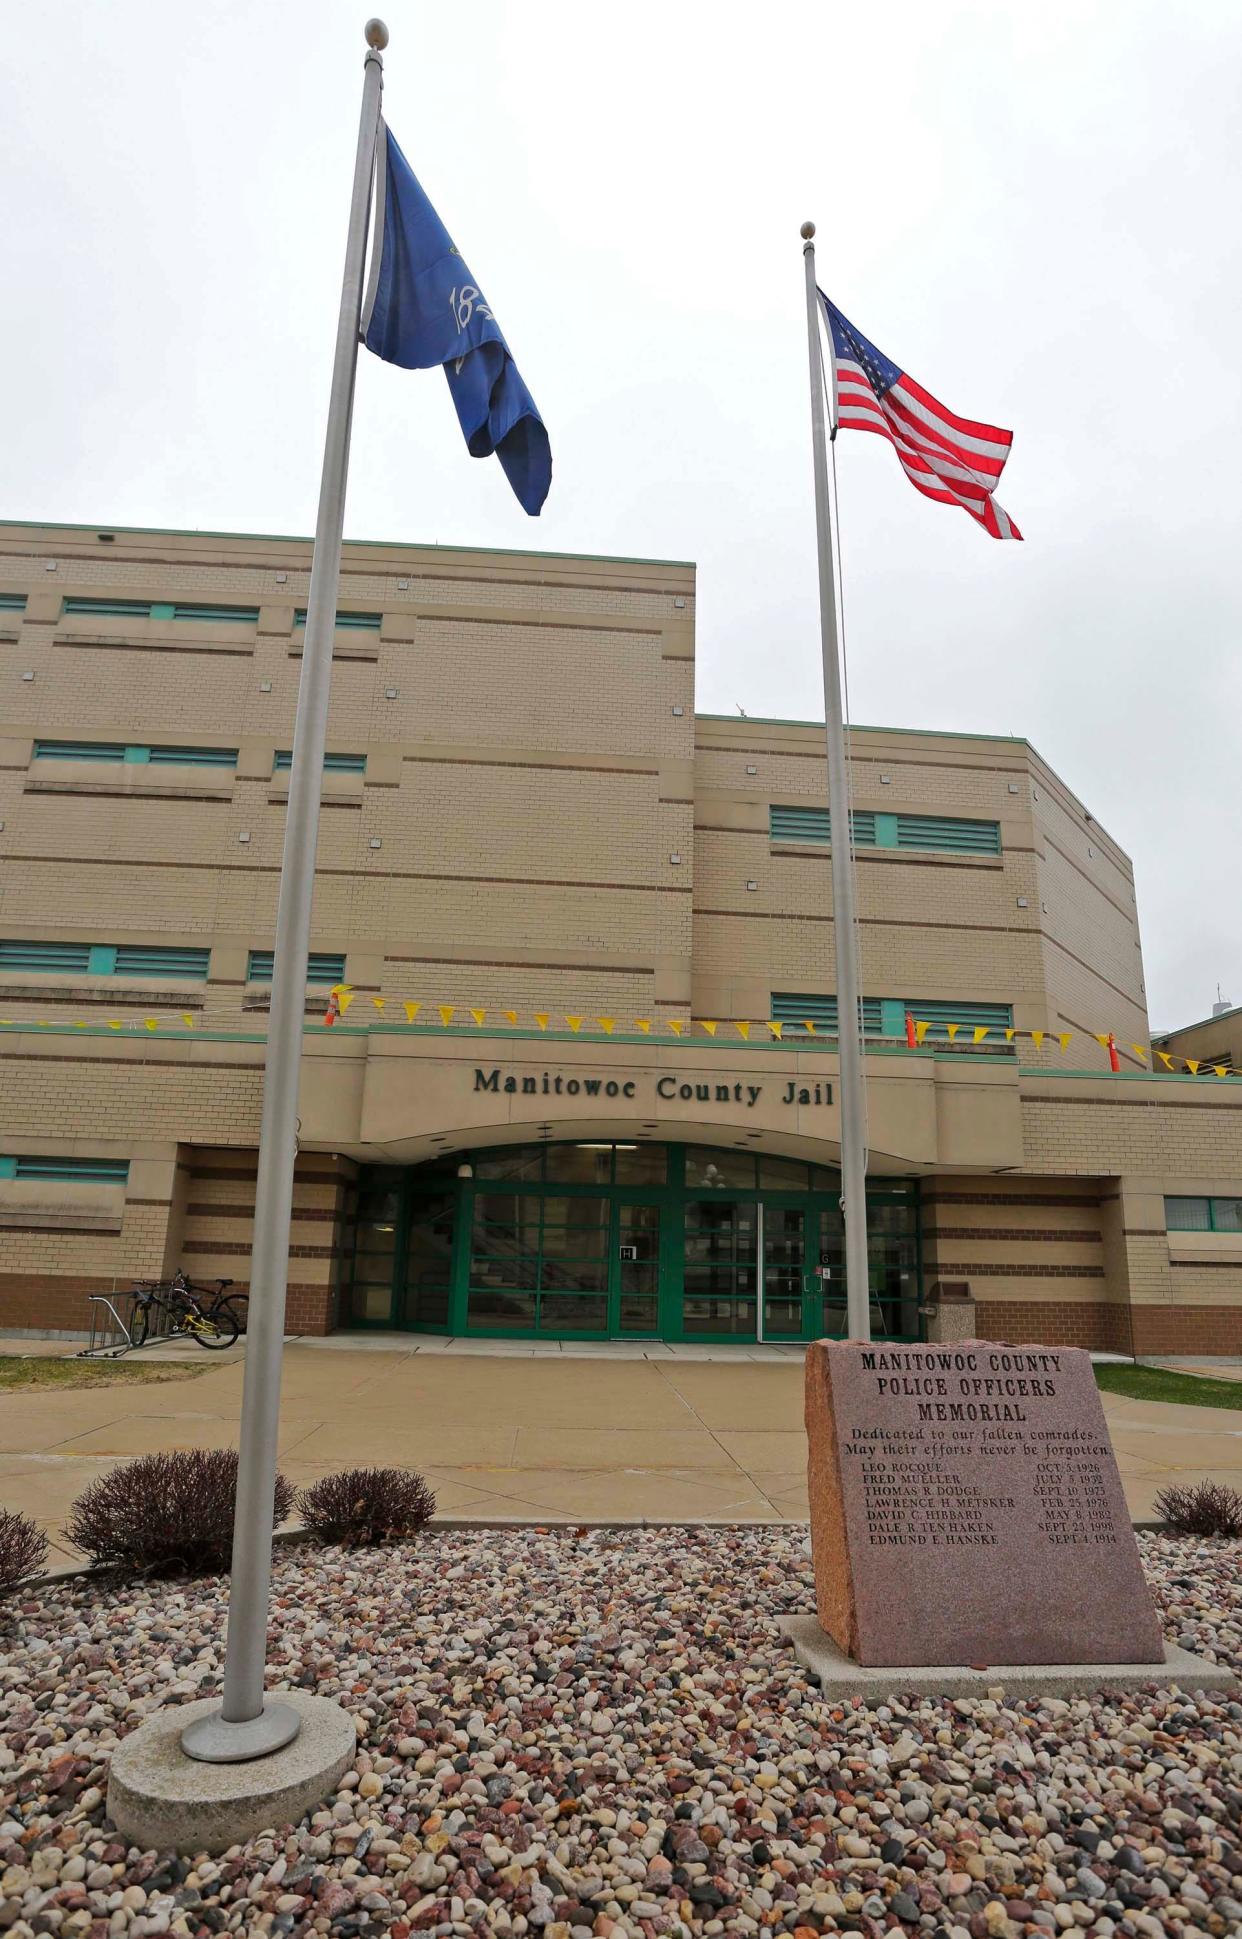 Flags flutter in the wind near the Manitowoc County Jail as seen, Thursday, April 23, 2020, in Manitowoc, Wis.